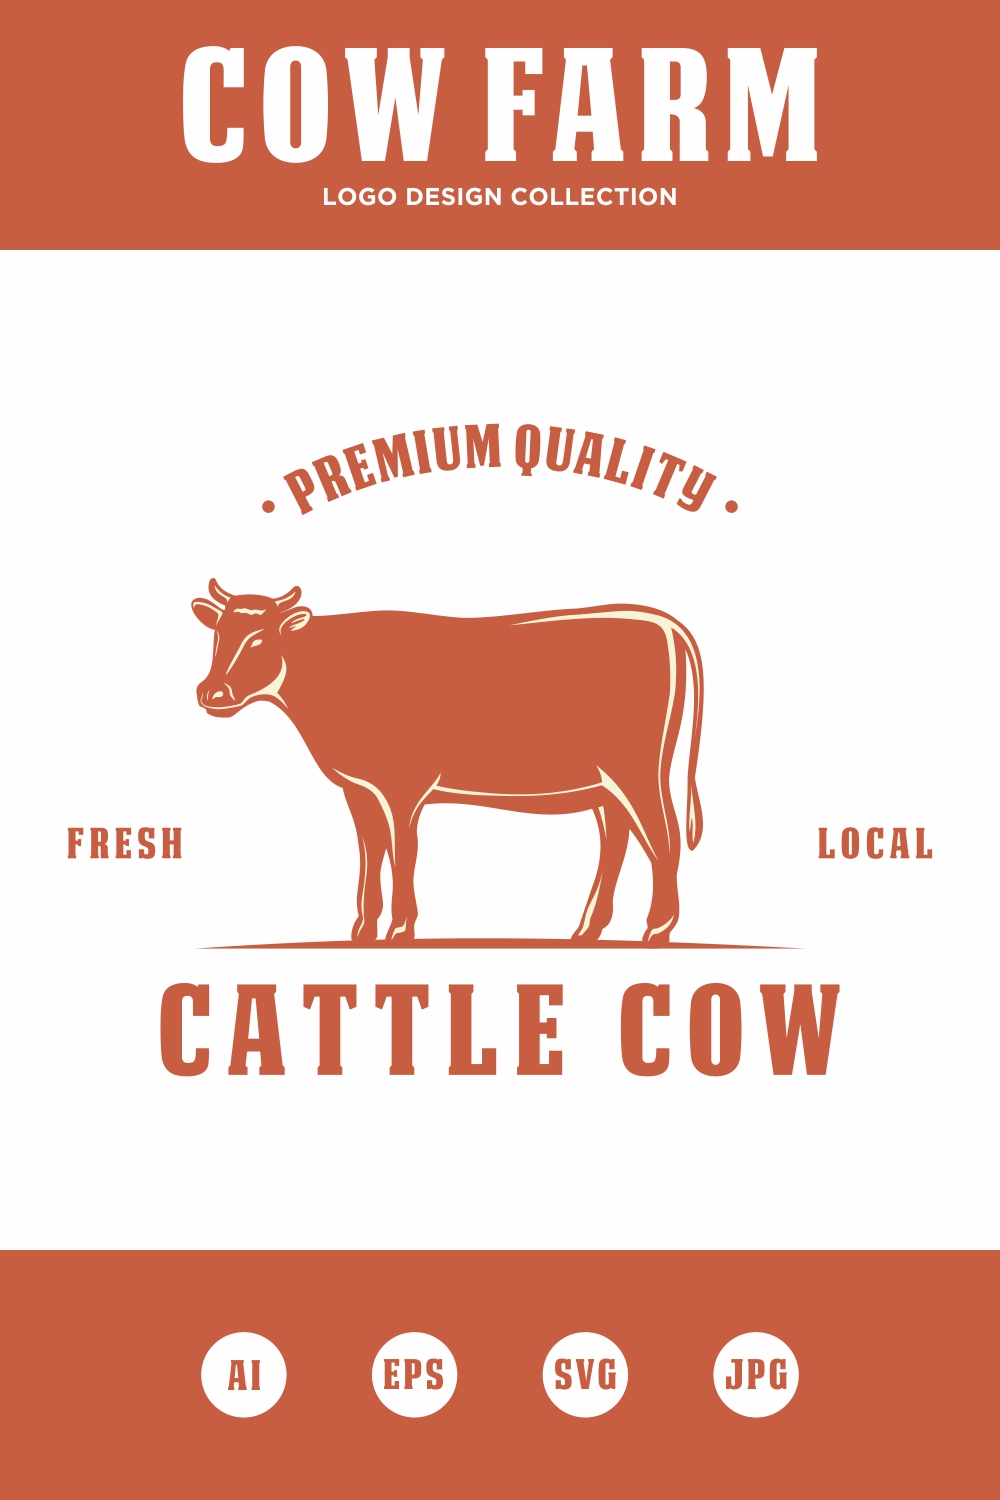 Cattle Farm logo design collection - only 5$ pinterest preview image.